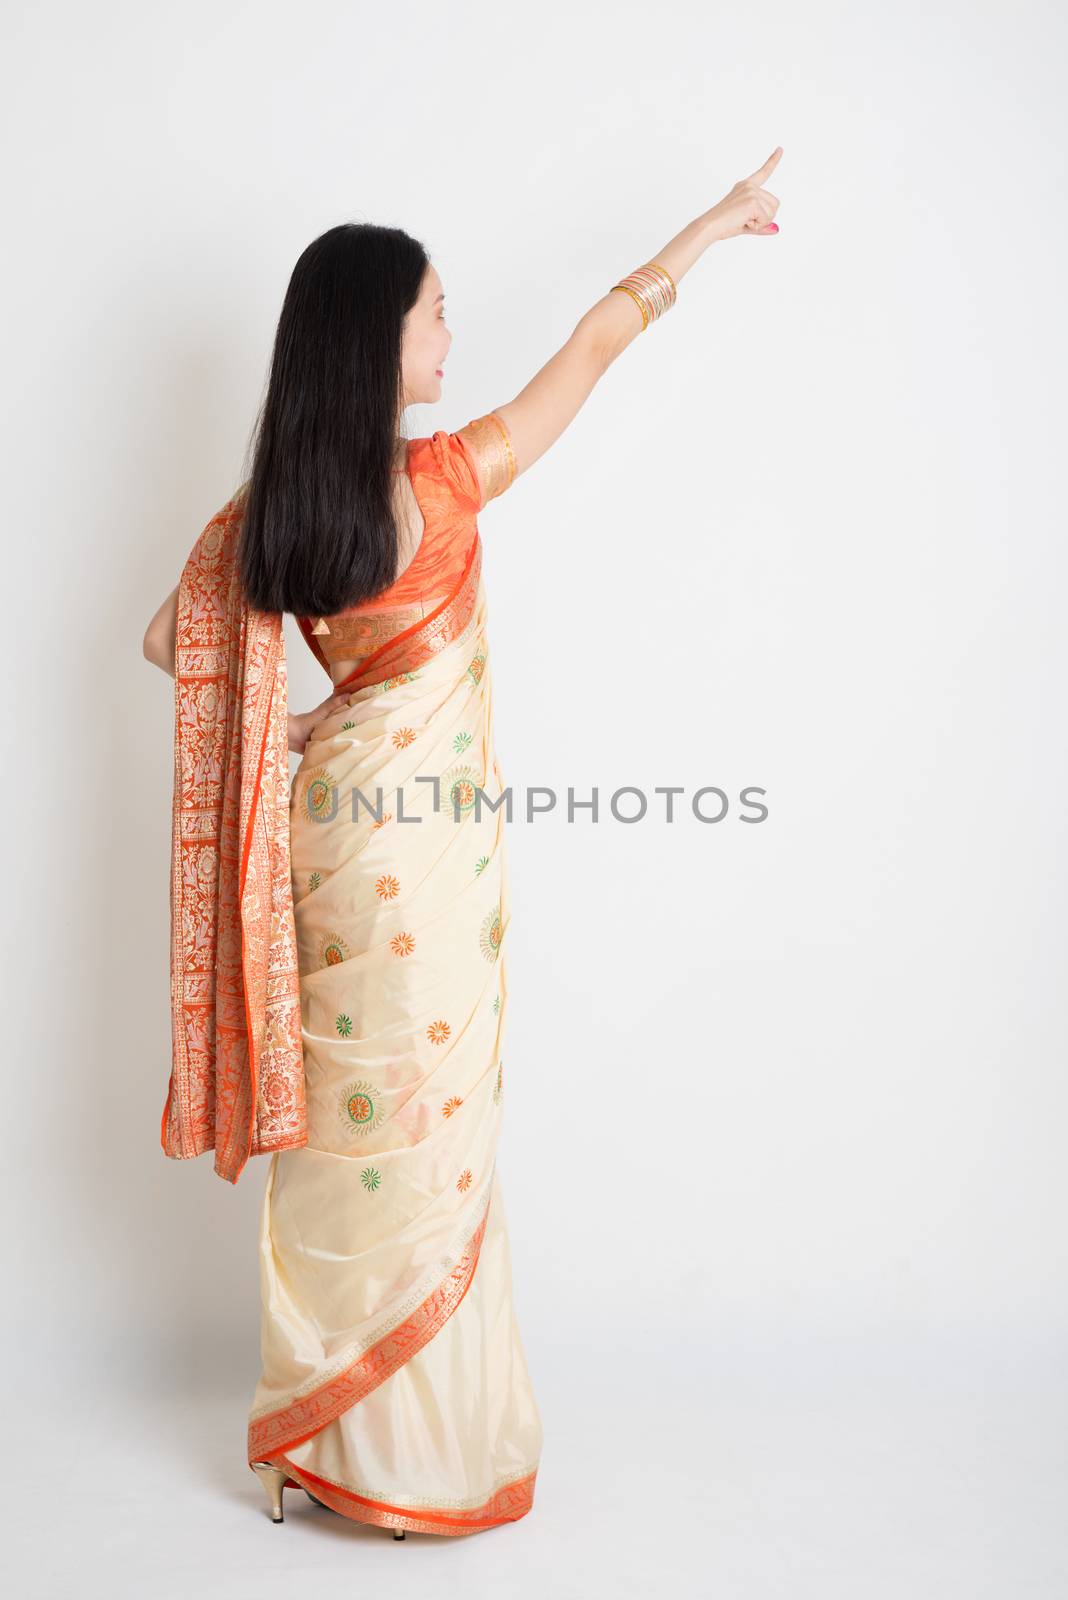 Rear view young mixed race Indian Chinese female in traditional sari dress pointing away, full length on plain background.